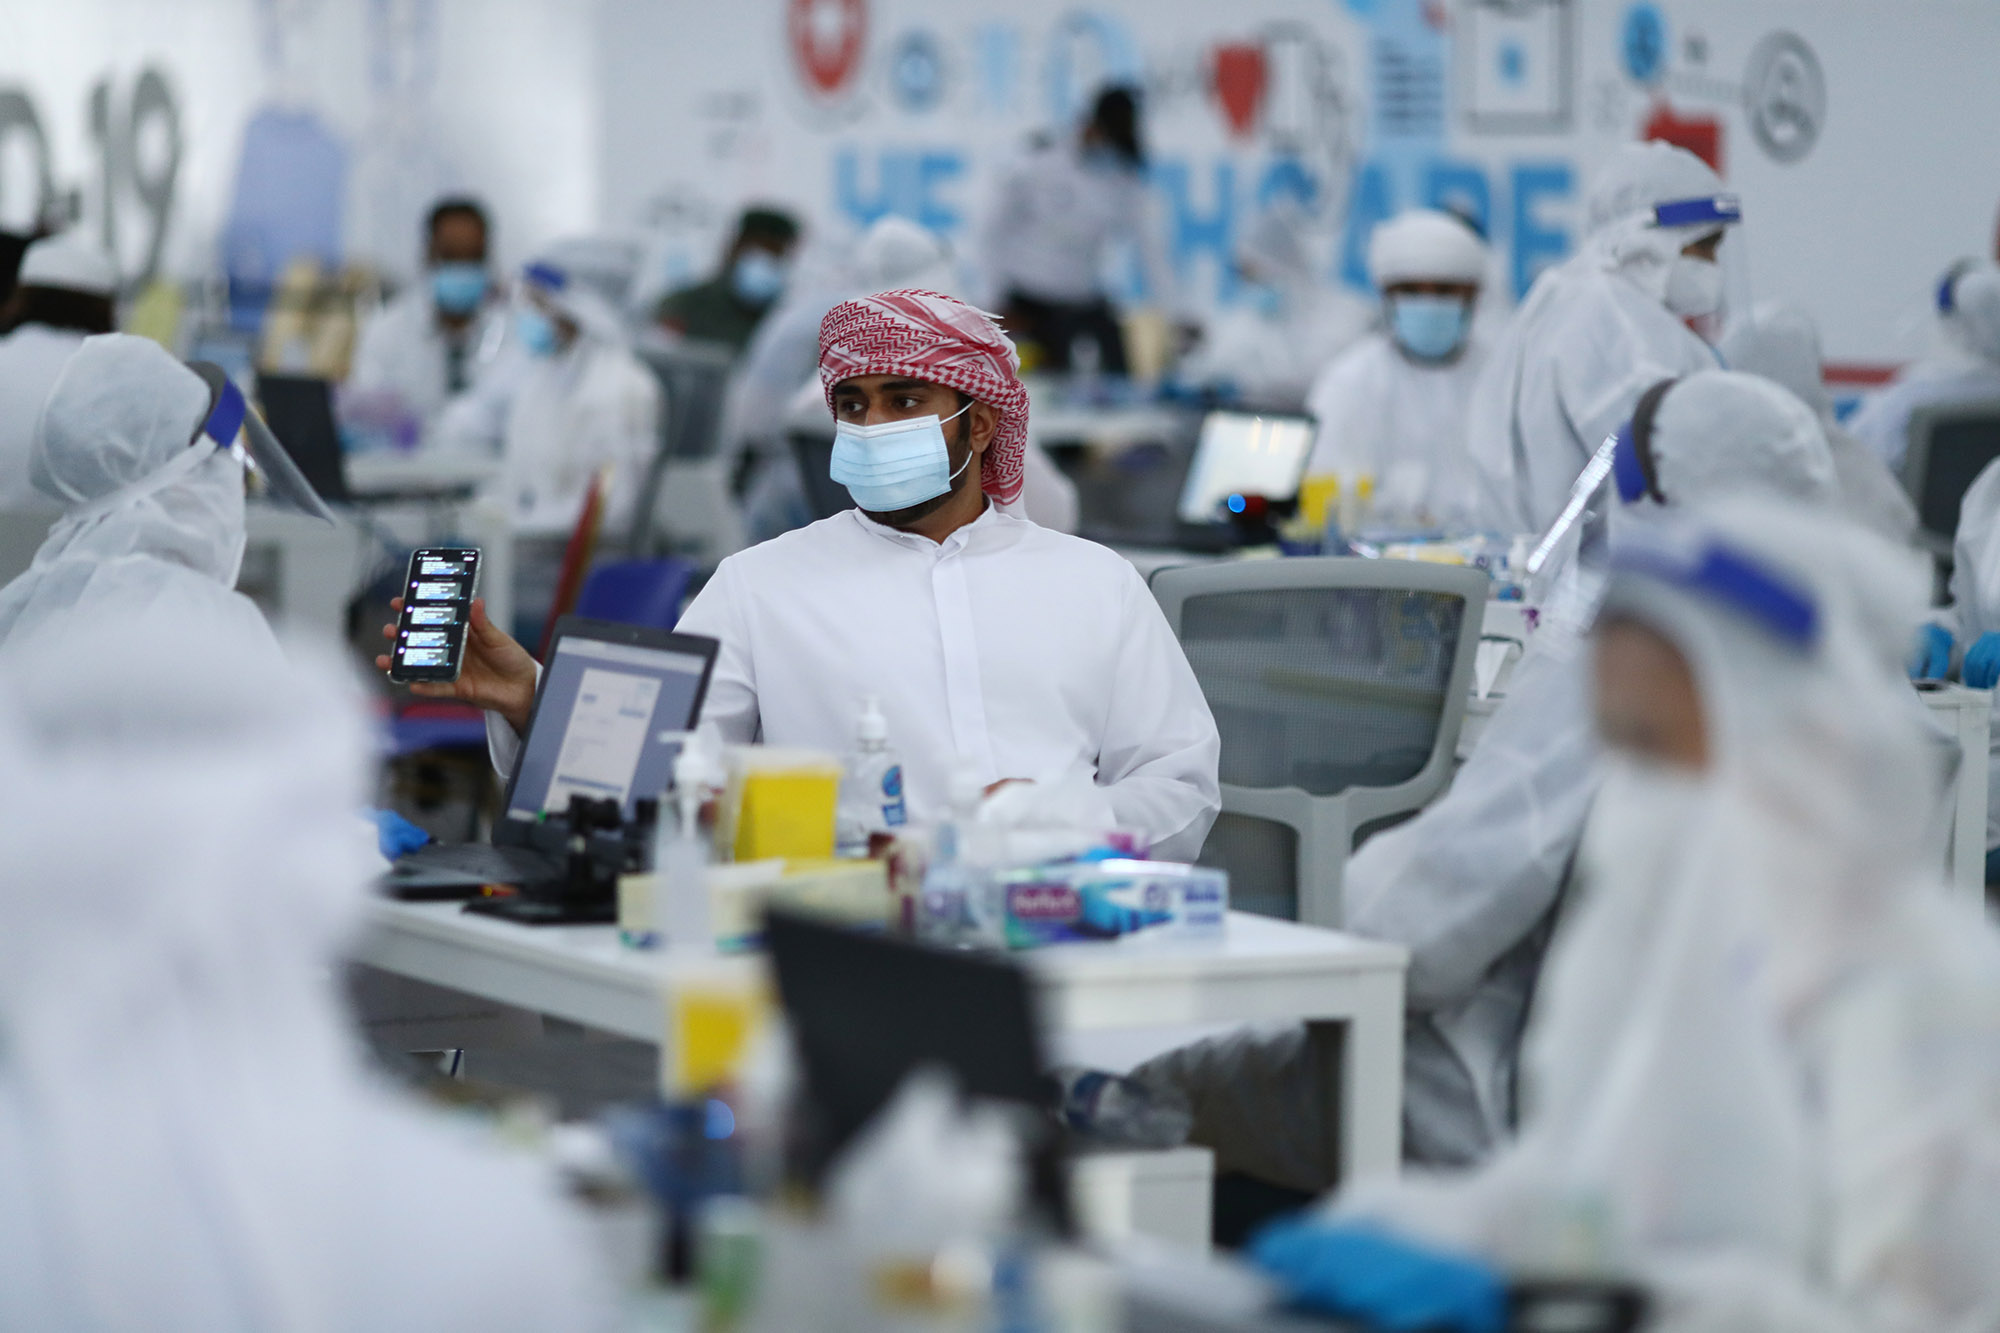 Middle East's first Expo to open in Dubai under shadow of pandemic